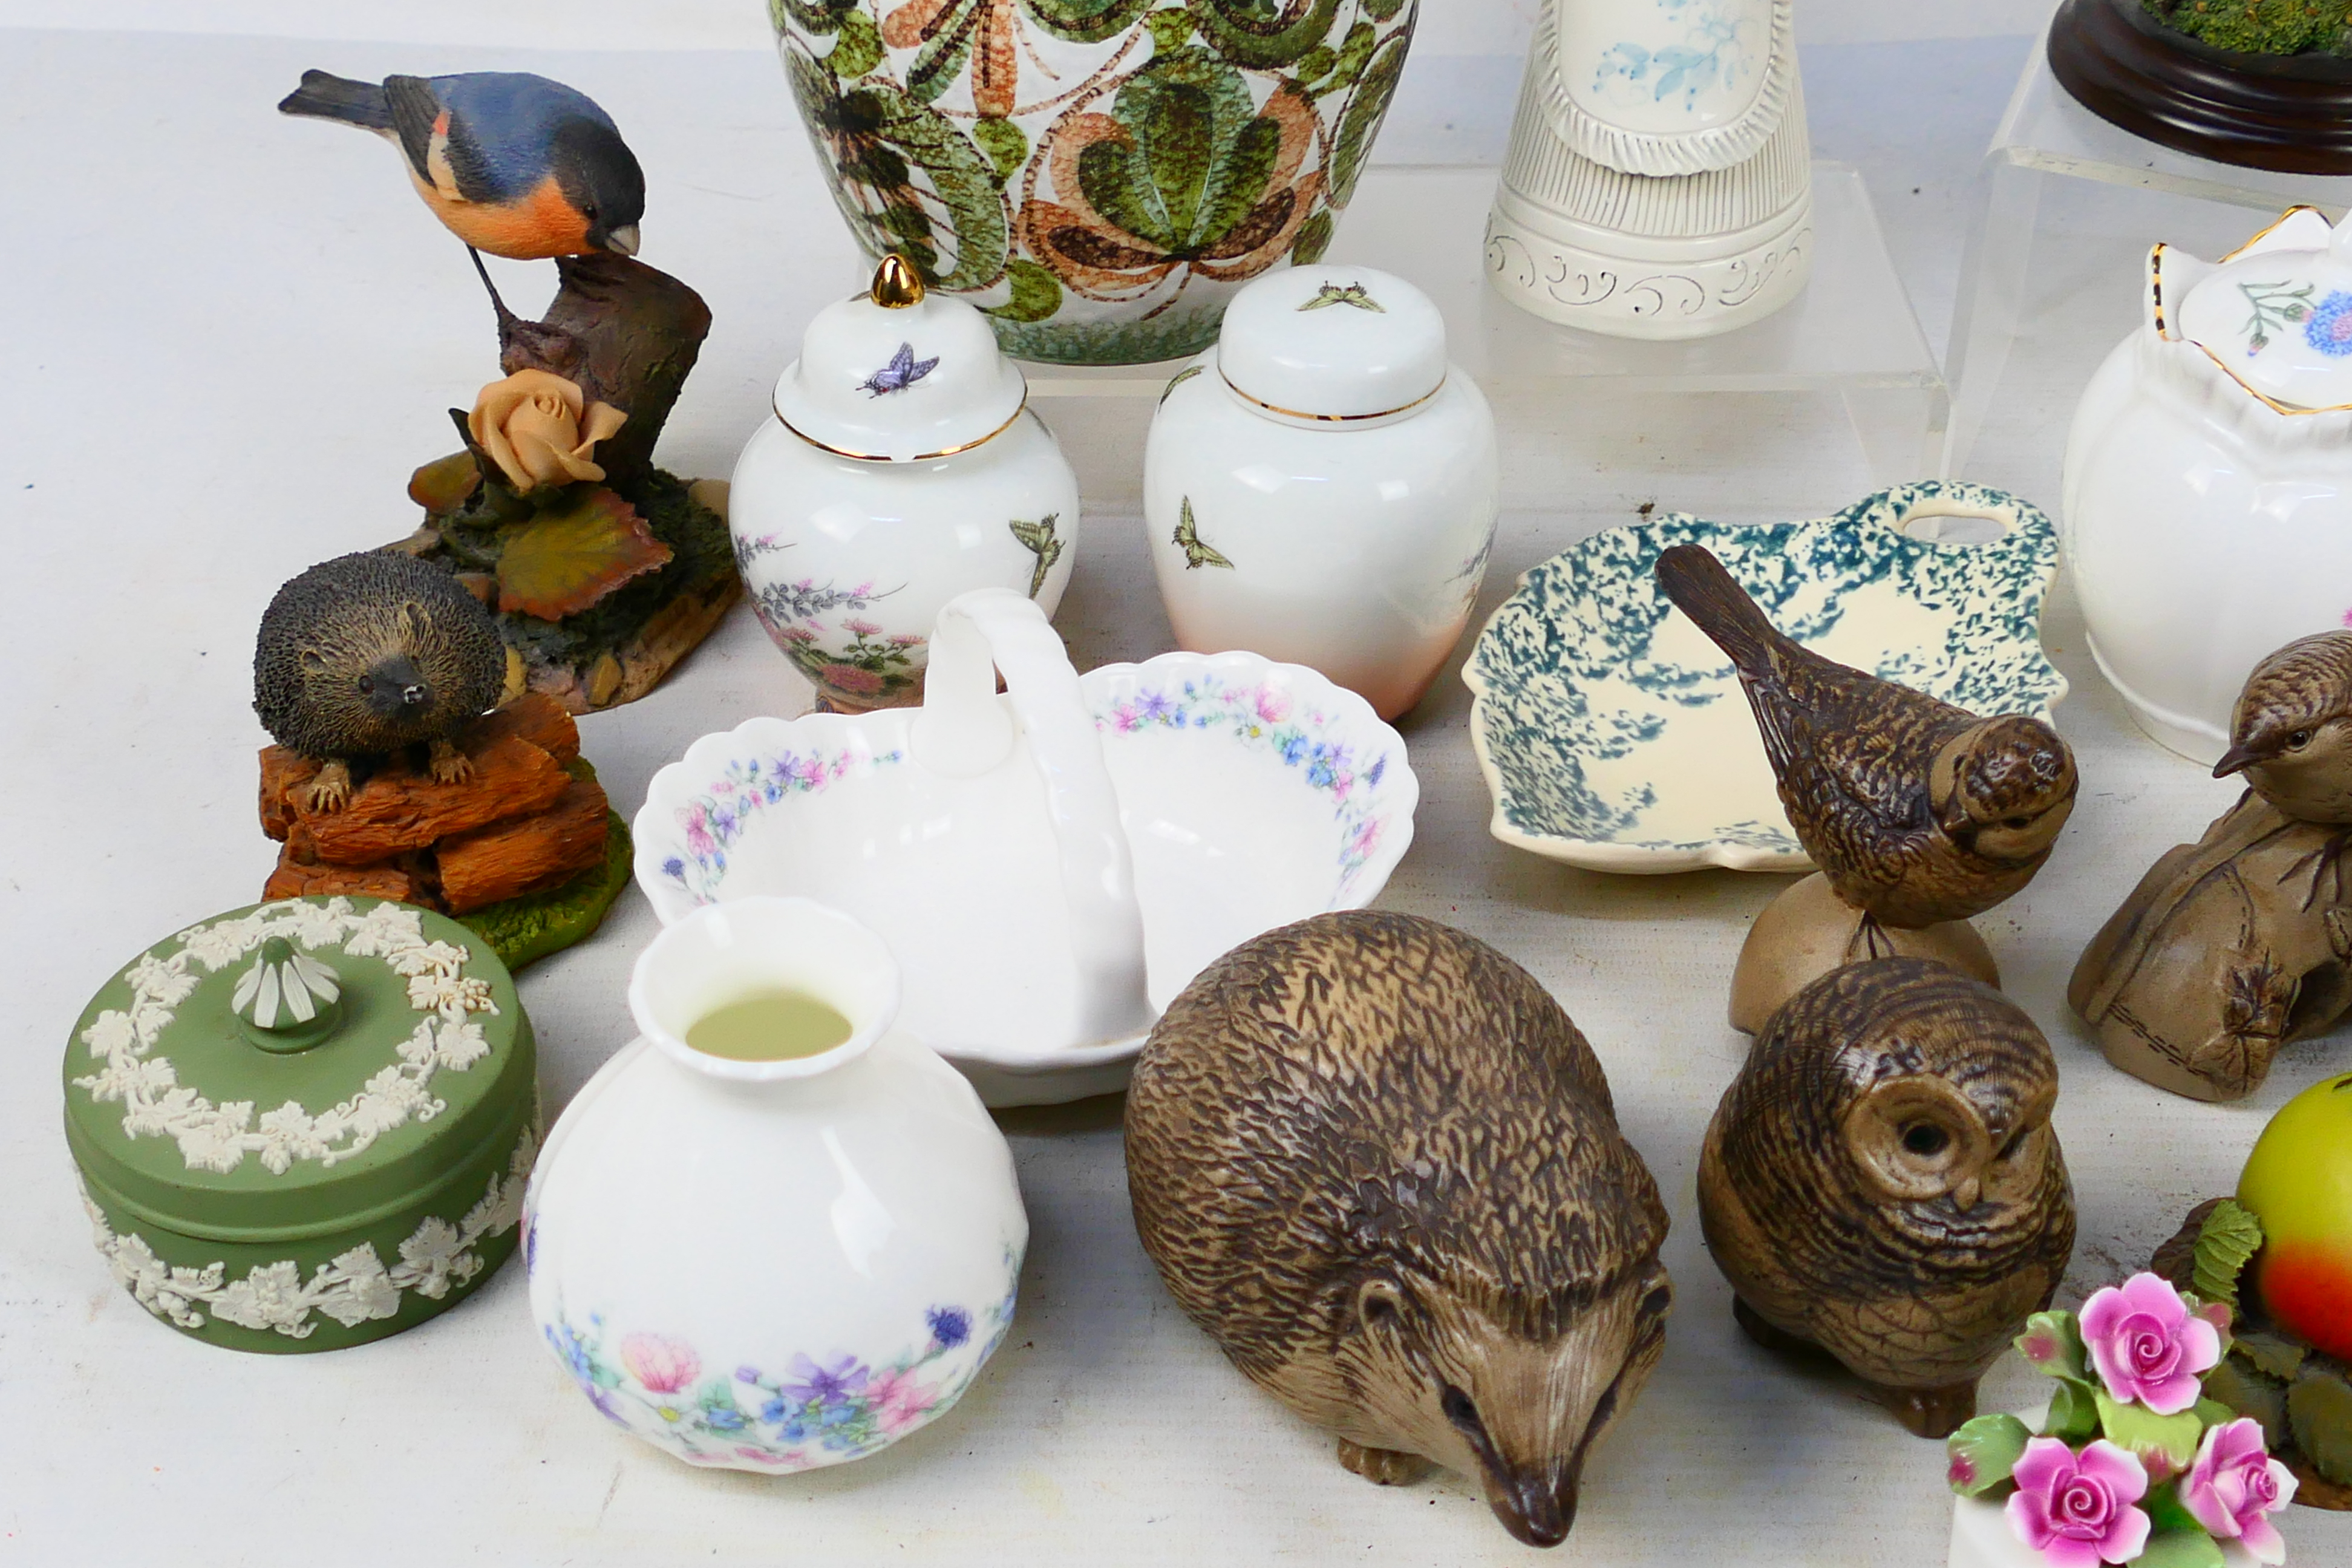 Mixed ceramics and ornamental wares to include Country Artists, Poole pottery animal figures, - Image 4 of 9